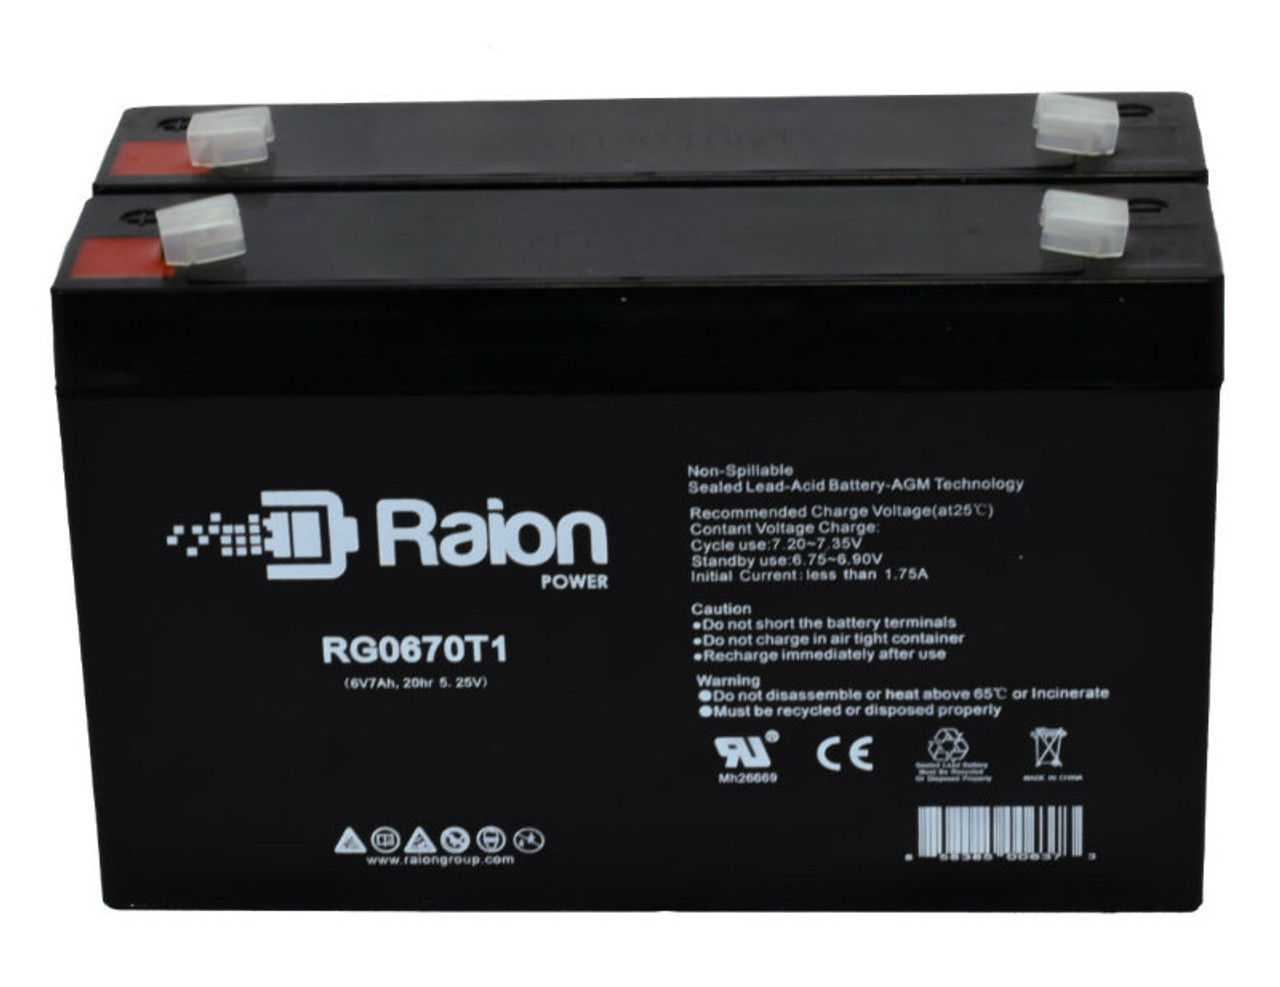 Raion Power RG0670T1 6V 7Ah Replacement Emergency Light Battery for Dual-Lite LM36ICH - 2 Pack